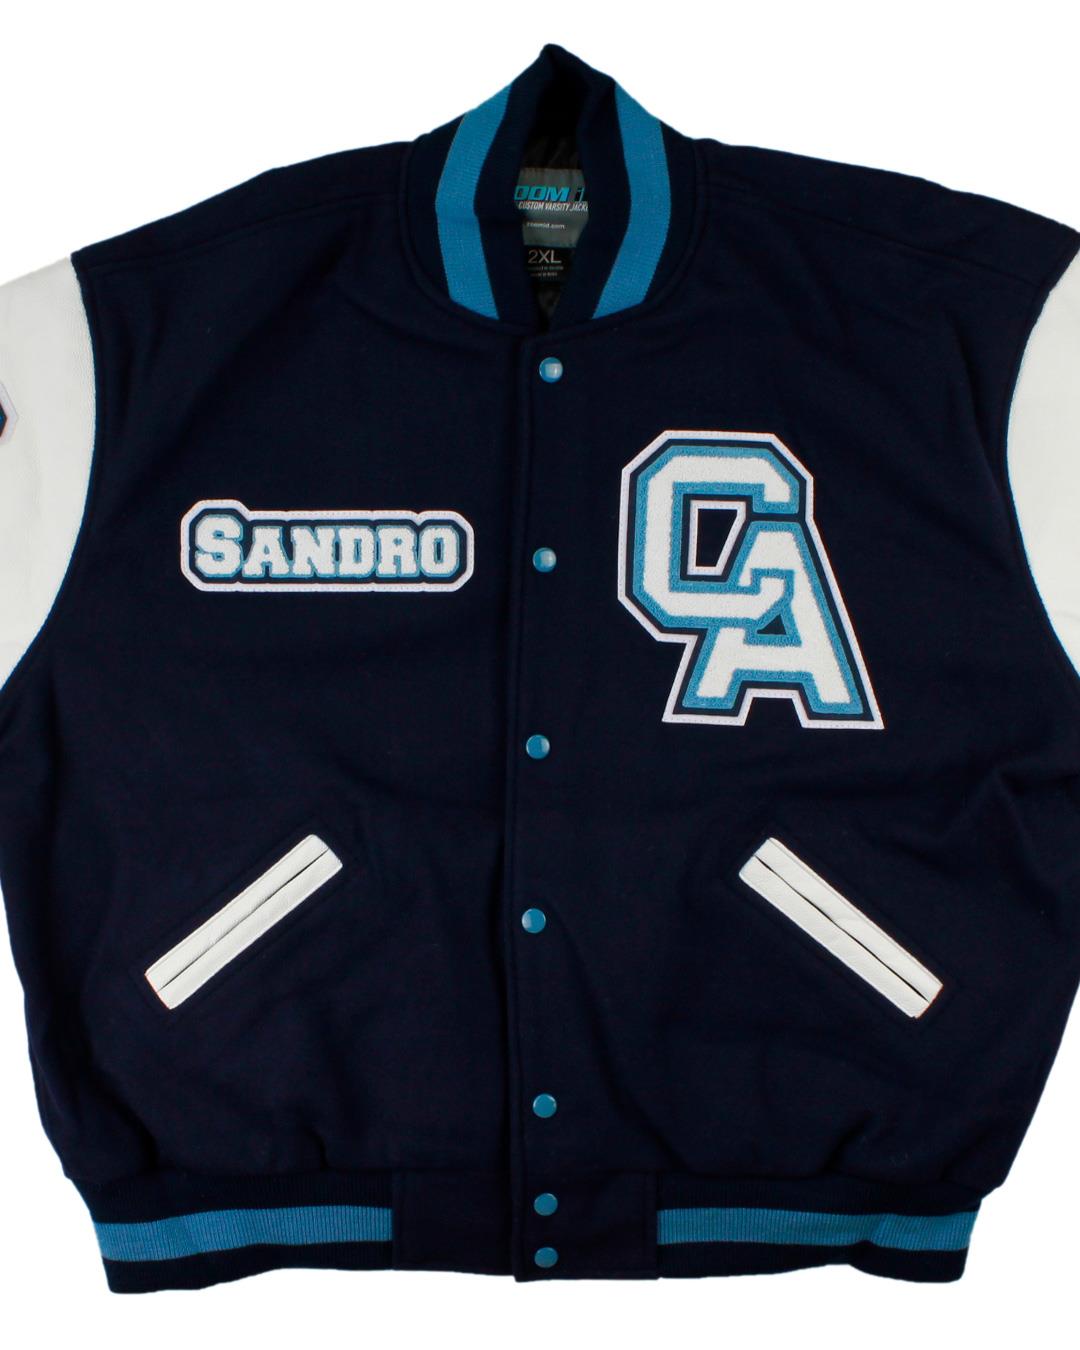 Coral Academy of Science Letterman Jacket, Reno NV - Front